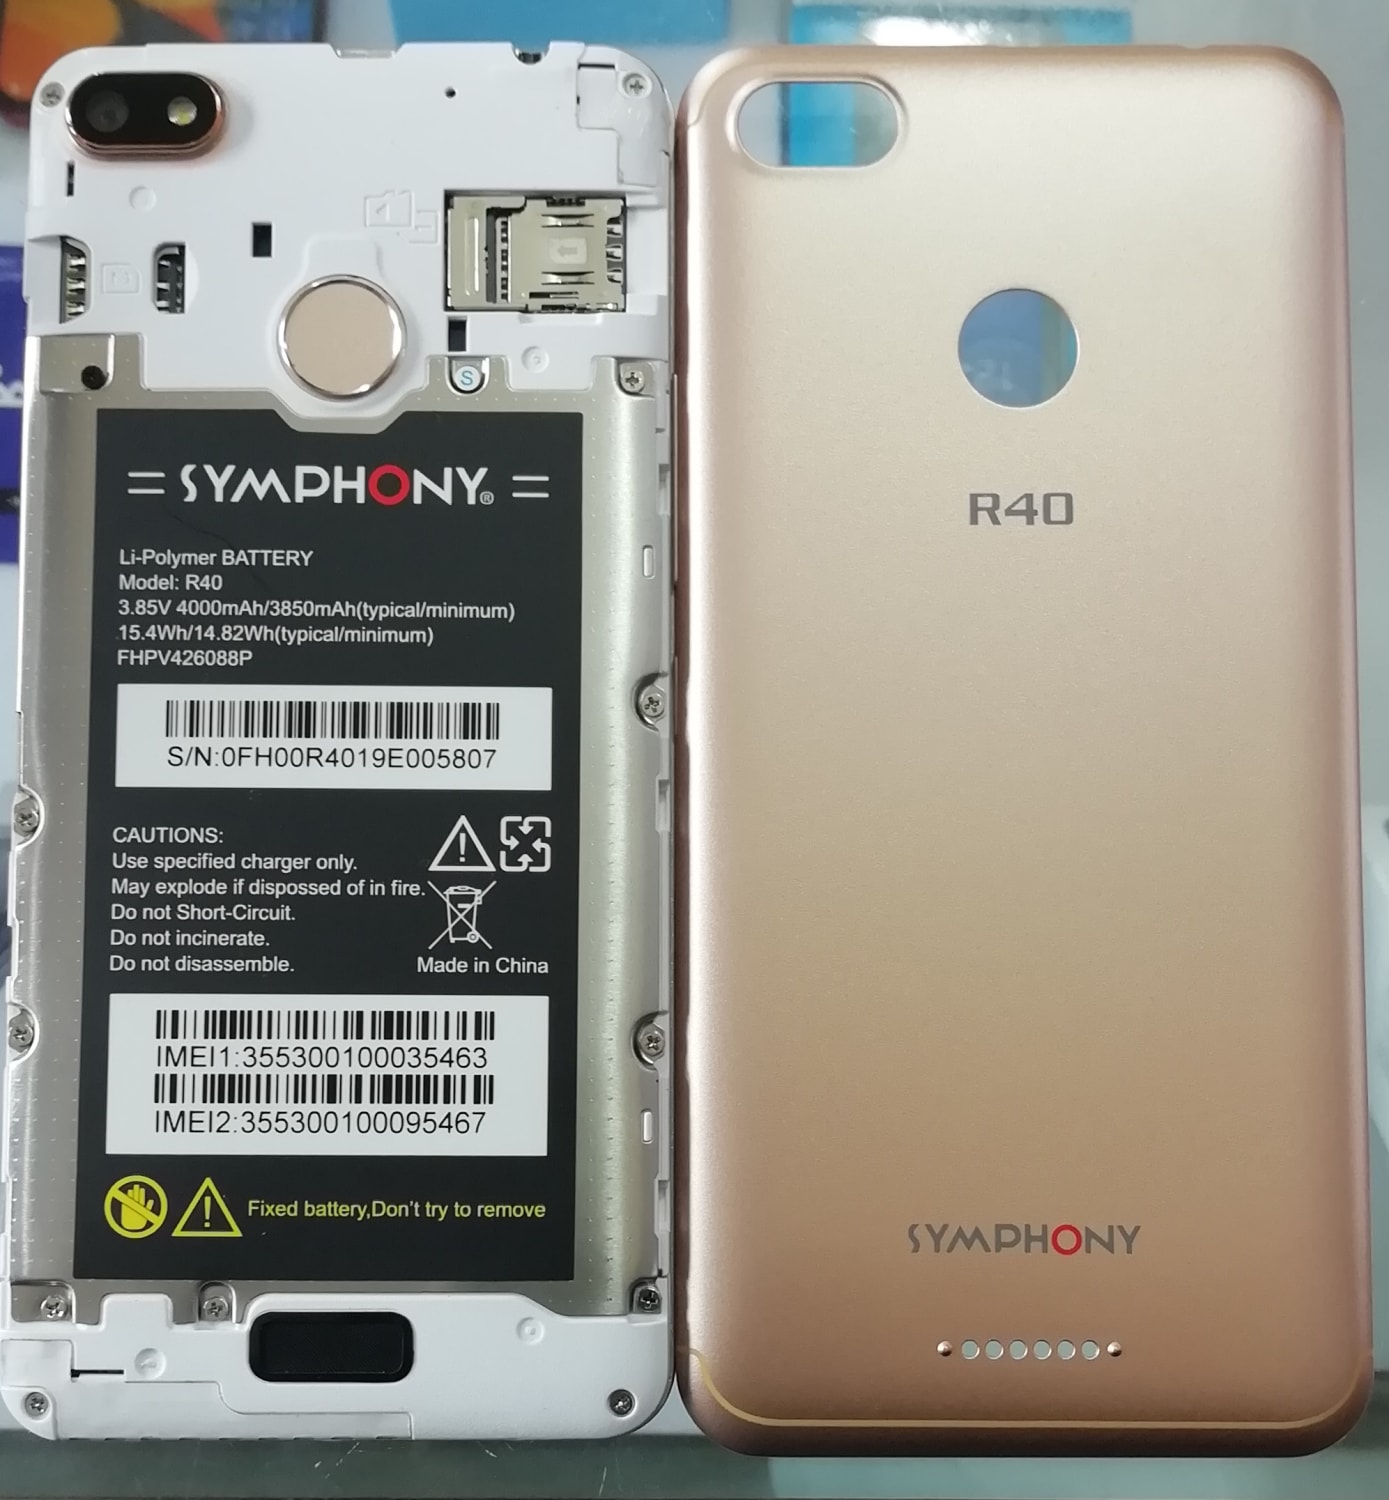 Symphony R40 Flash File Firmware Download